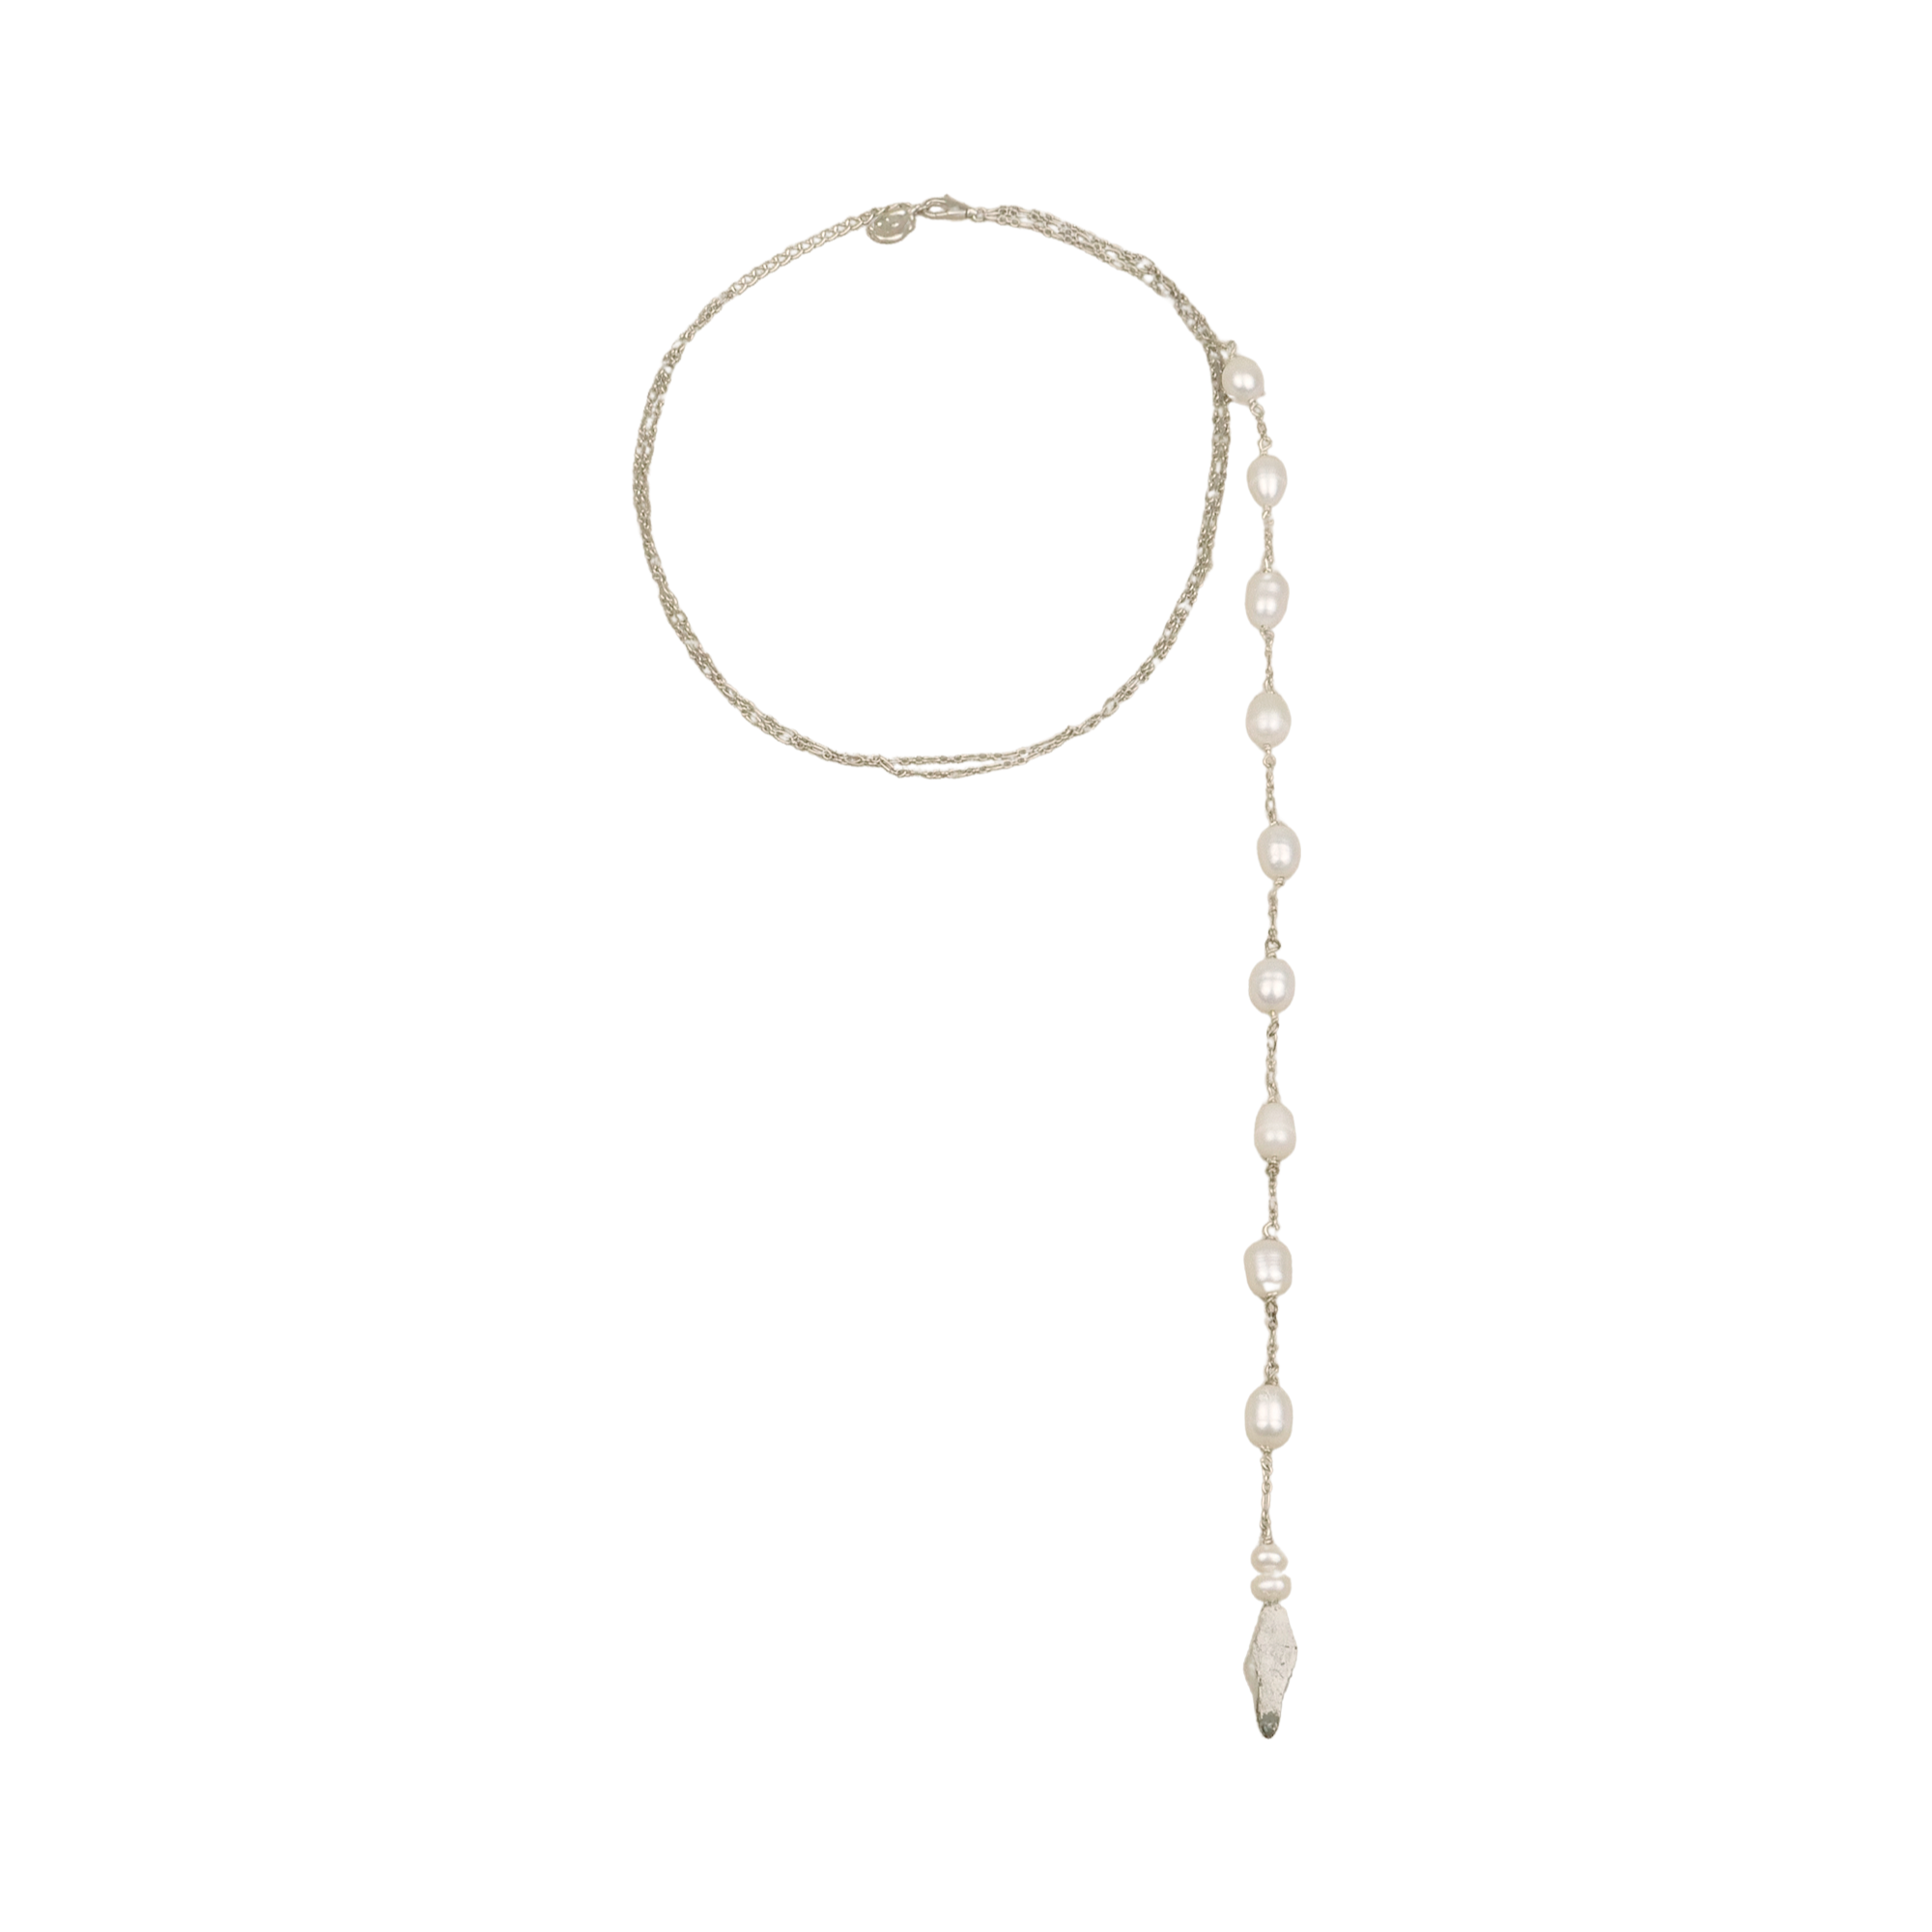 Hanying Double Pearl Necklace With Tassel